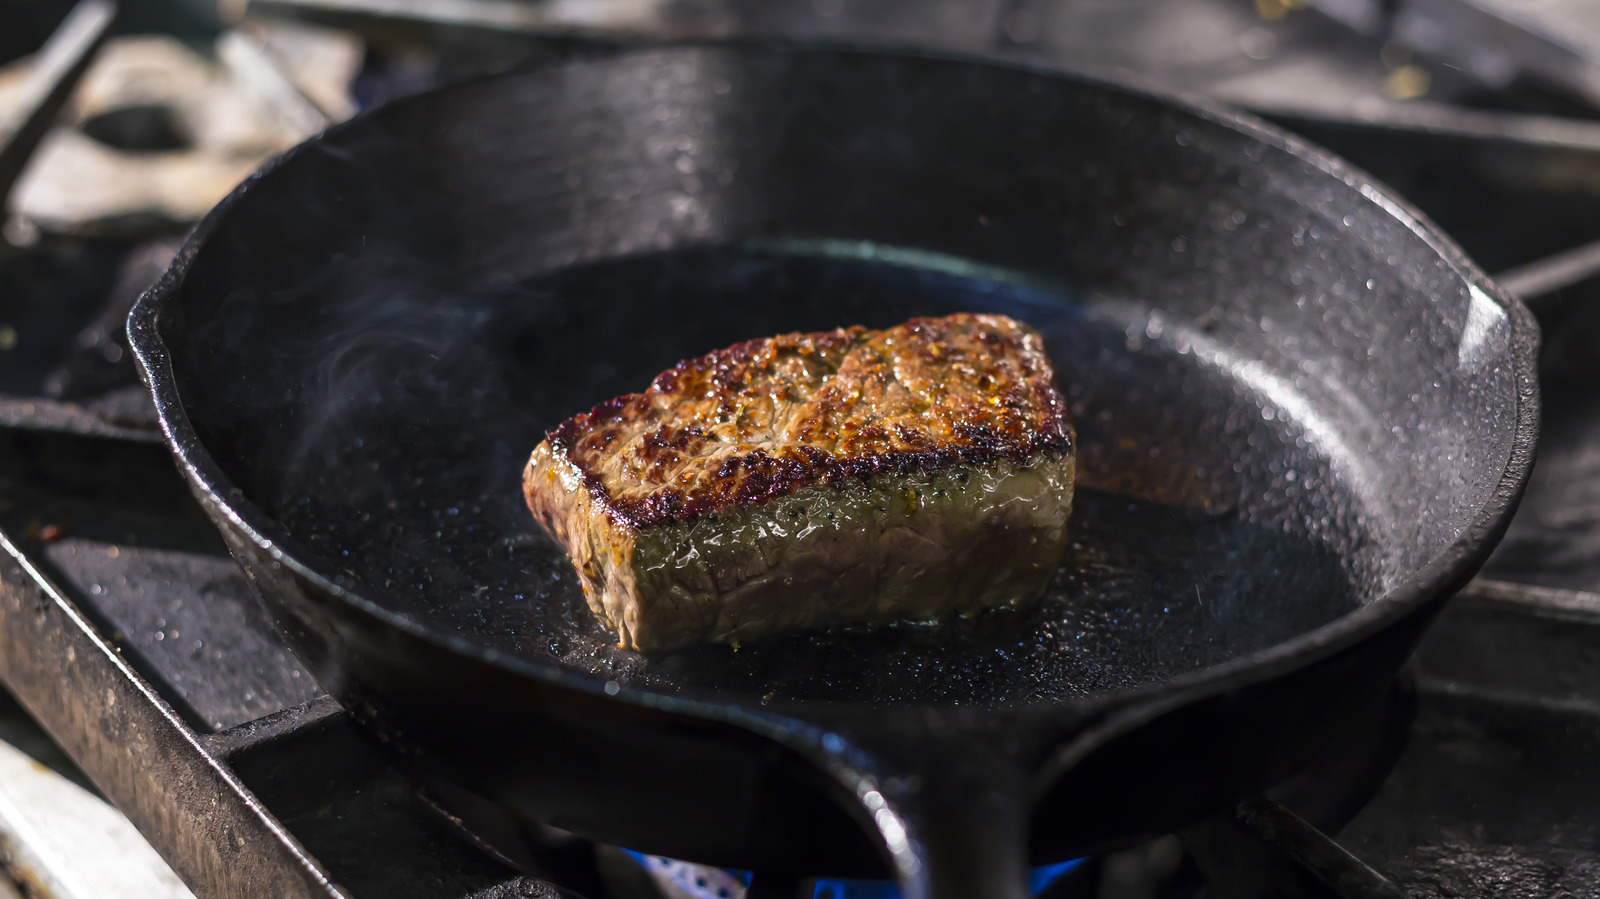 What's The Difference Between Searing And Browning Meat?